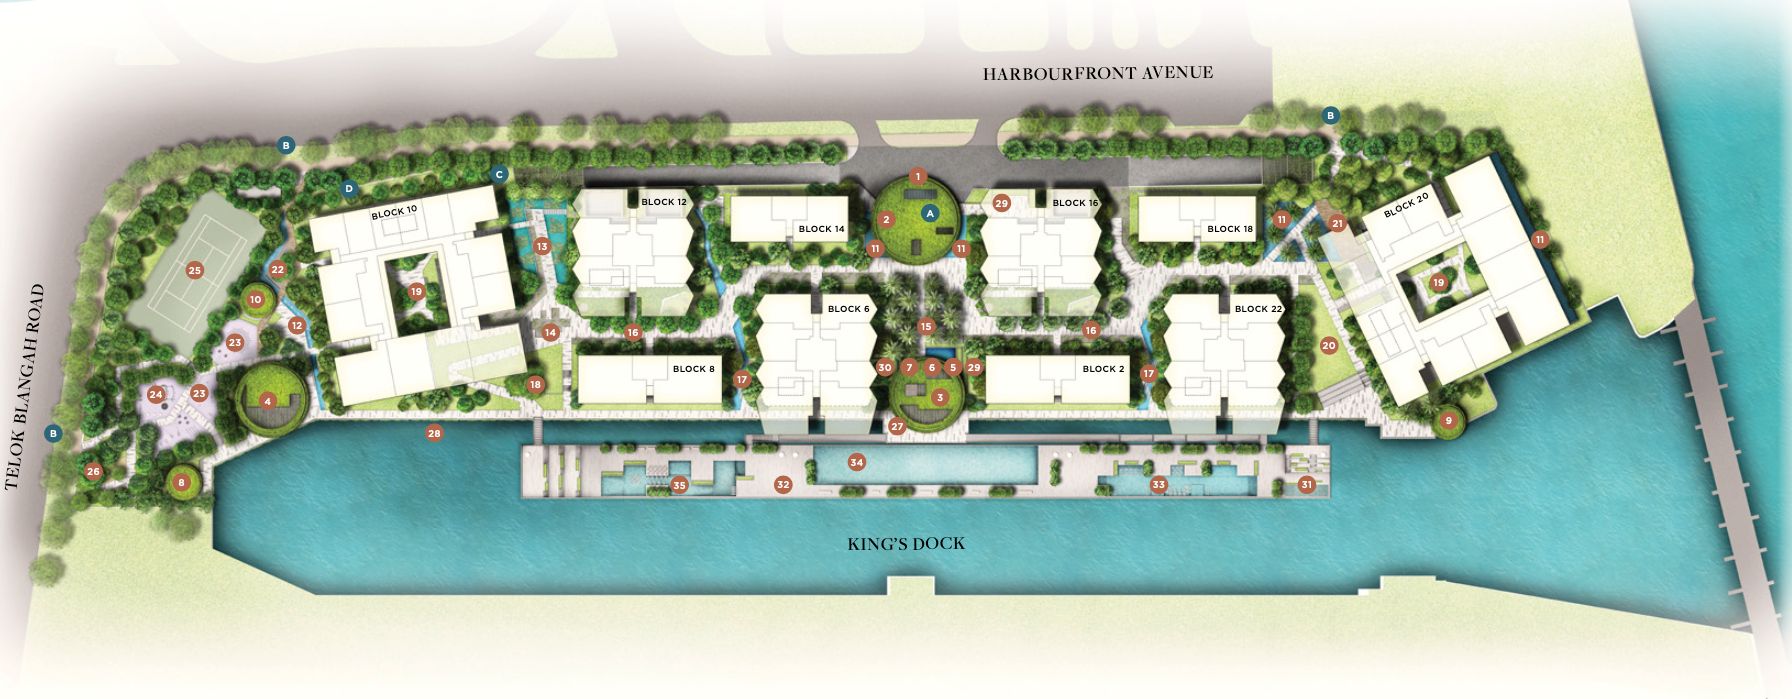 the reef at king's dock site plan 